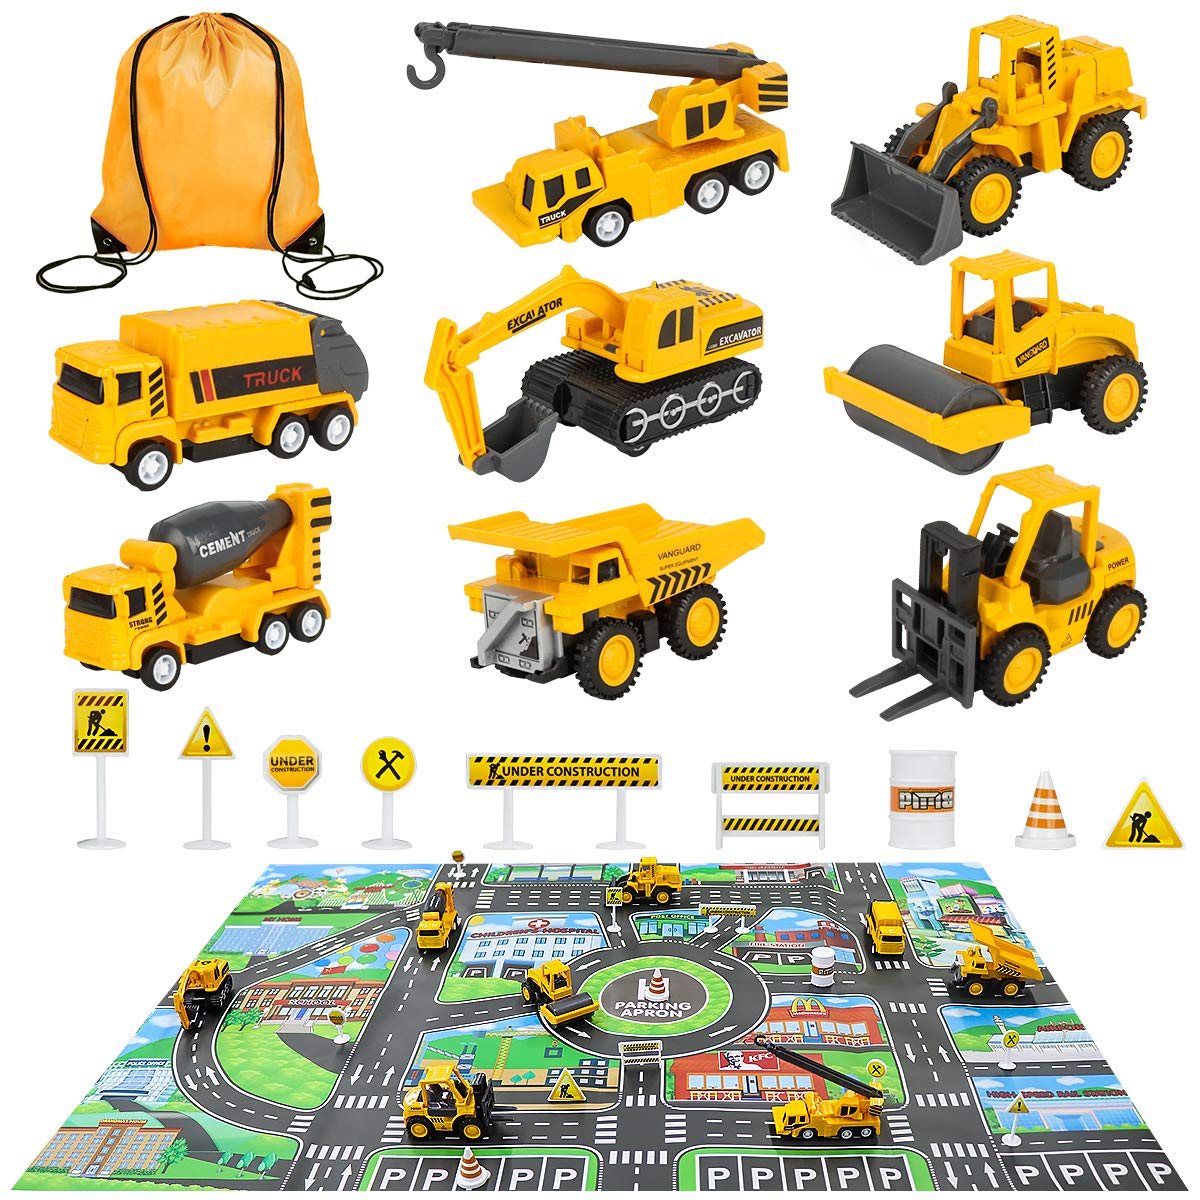 Meland Construction Vehicles Truck Toys Set with Play Mat - 8 Mini Engineer Pull Back Cars, 22.7x32.7Inch Playmat & 12 Road Signs, Toy Car Set for Boys Toddlers Birthday Christmas 3+ Year Old